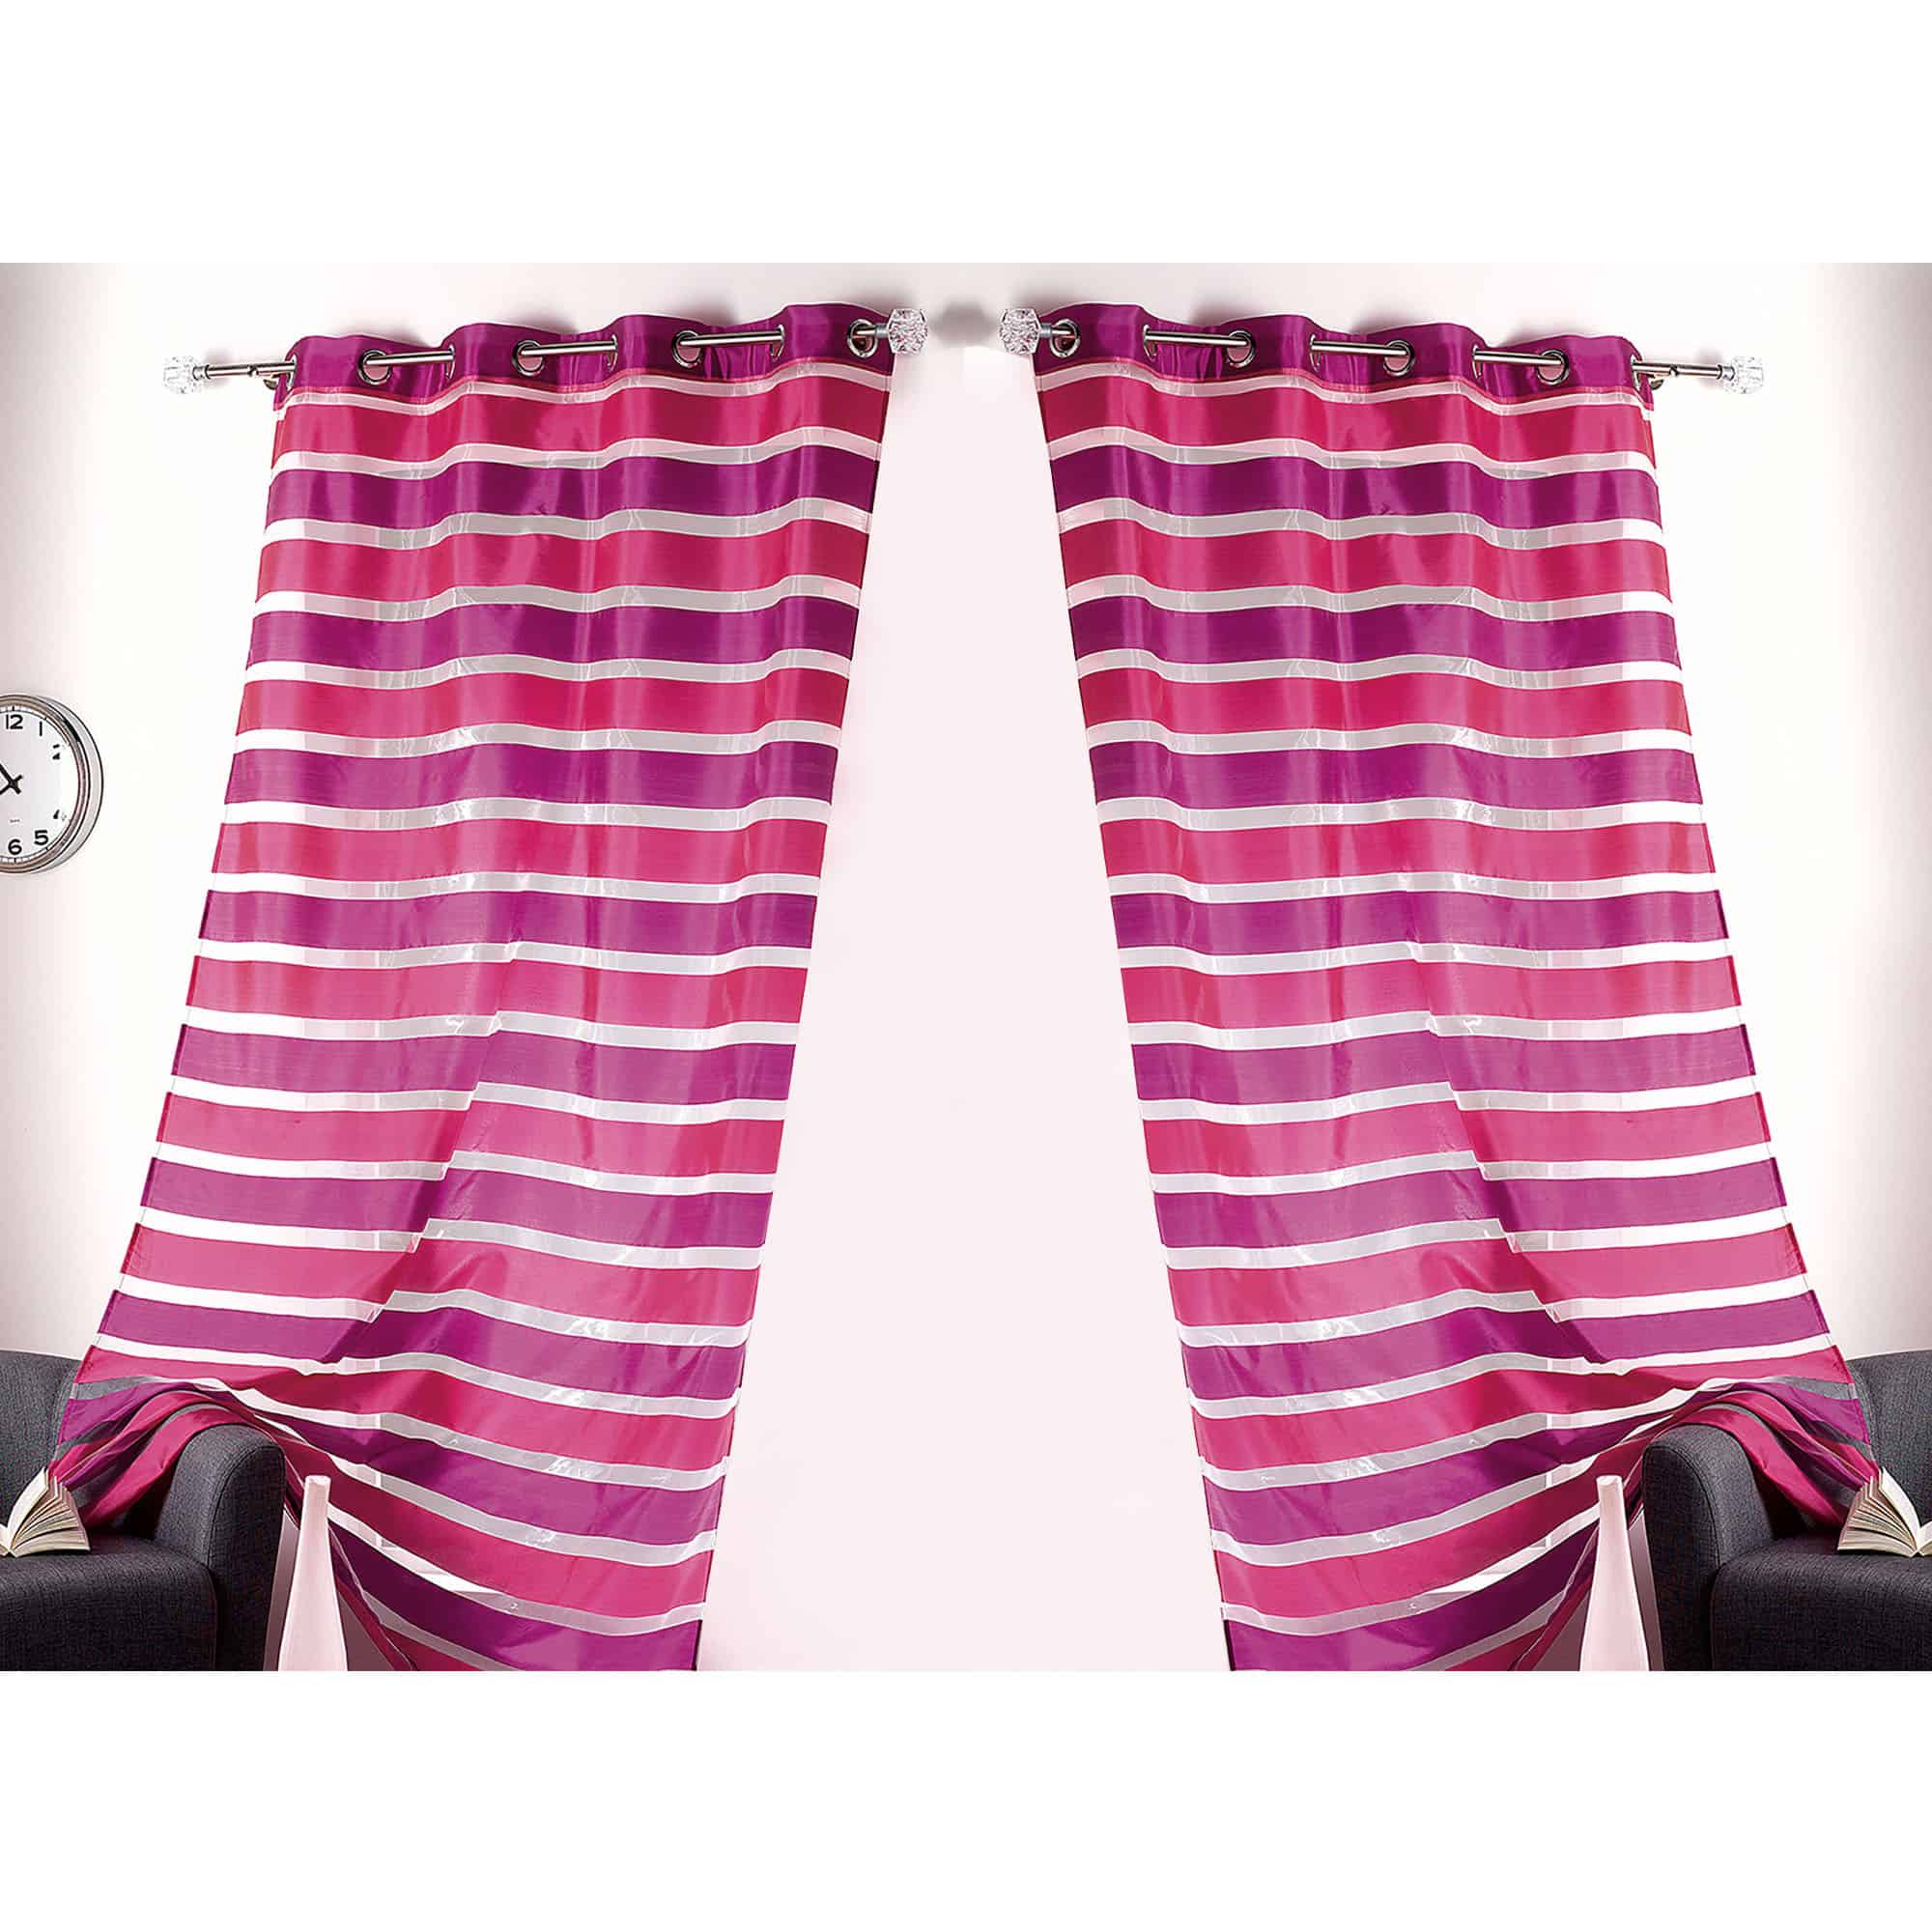 bicolor hot pink fuchsia organza striped sheer curtain panels 2 pieces for large window